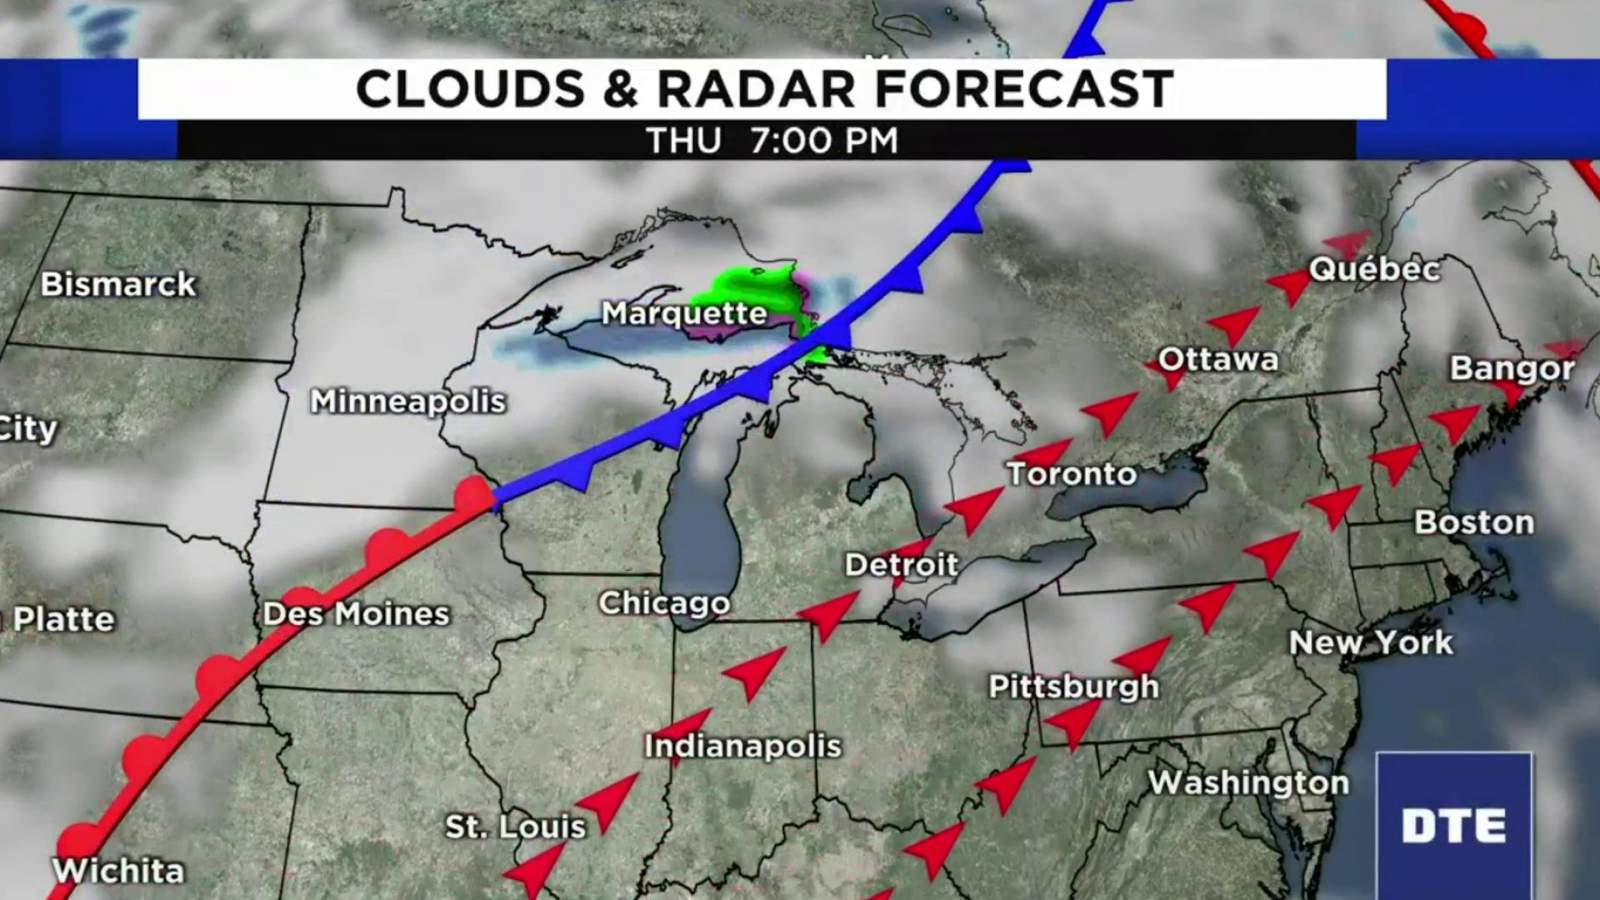 Metro Detroit weather: Getting closer to that big warm-up